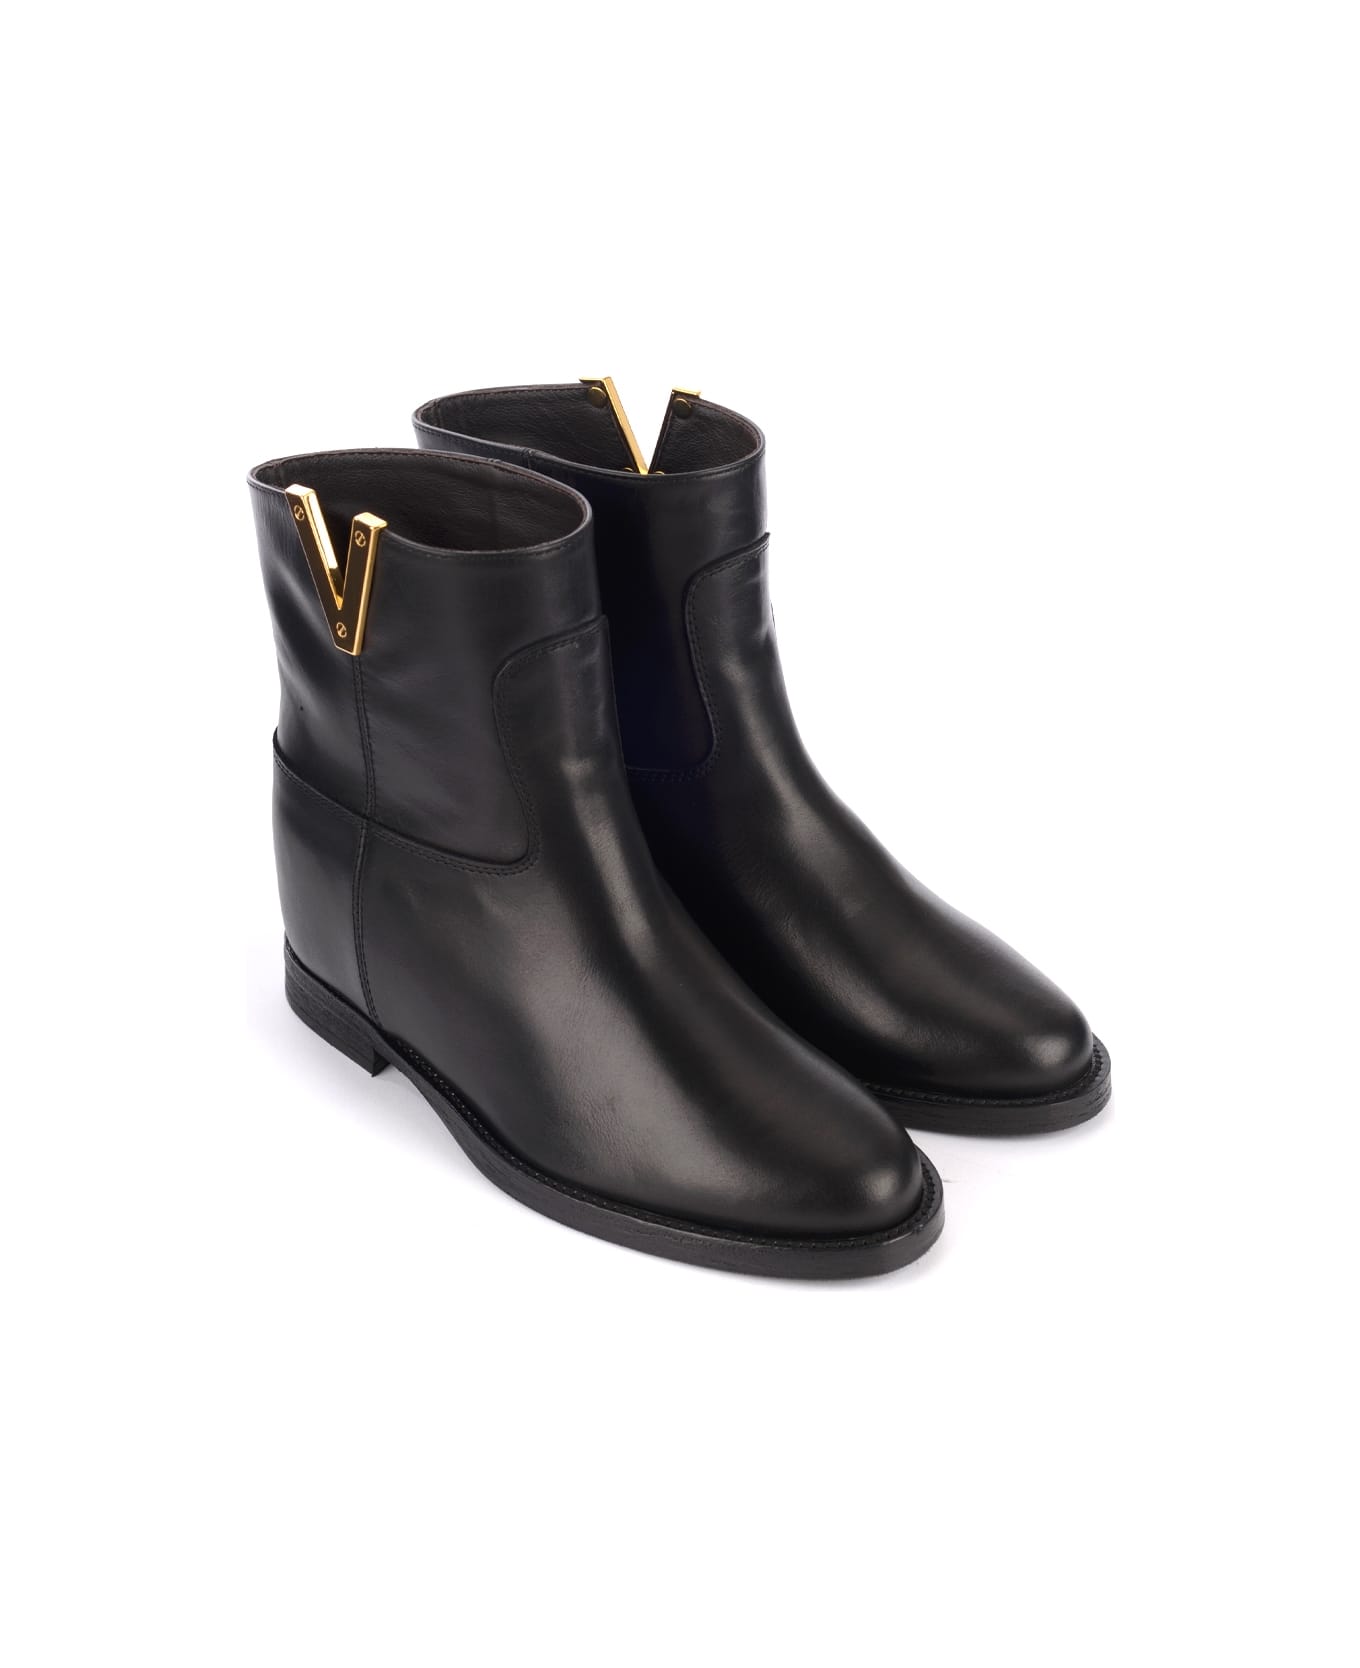 Via Roma 15 Ankle Boot In Black Leather With Golden V - BLACK ブーツ